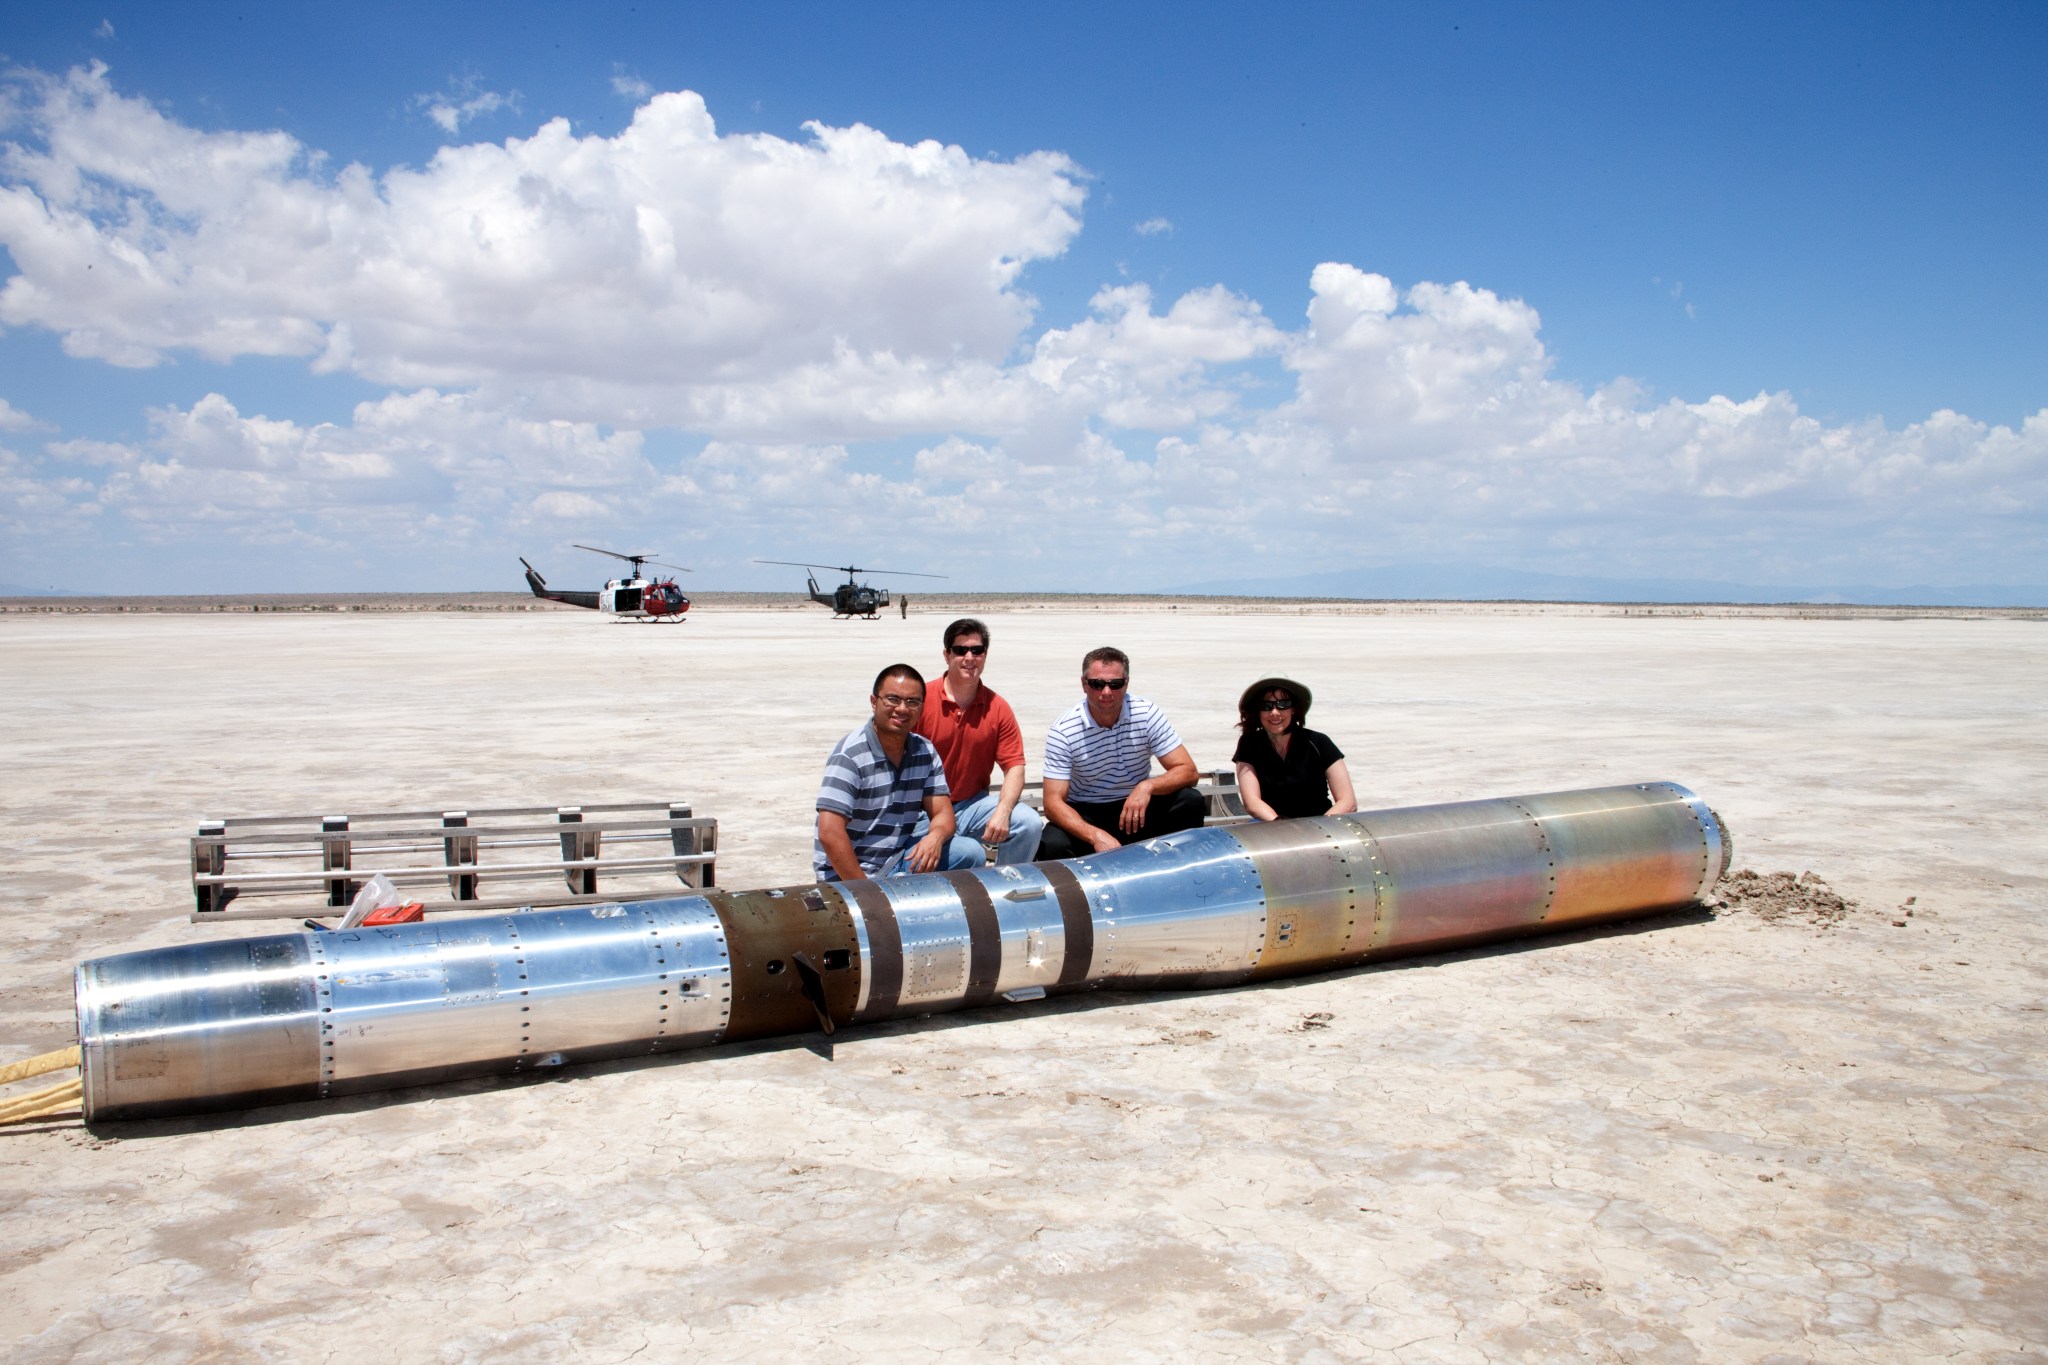 The recovering team poses for a photo with the payload before loading the instrument in a pair of U.S. Army Helicopters and returning to base.